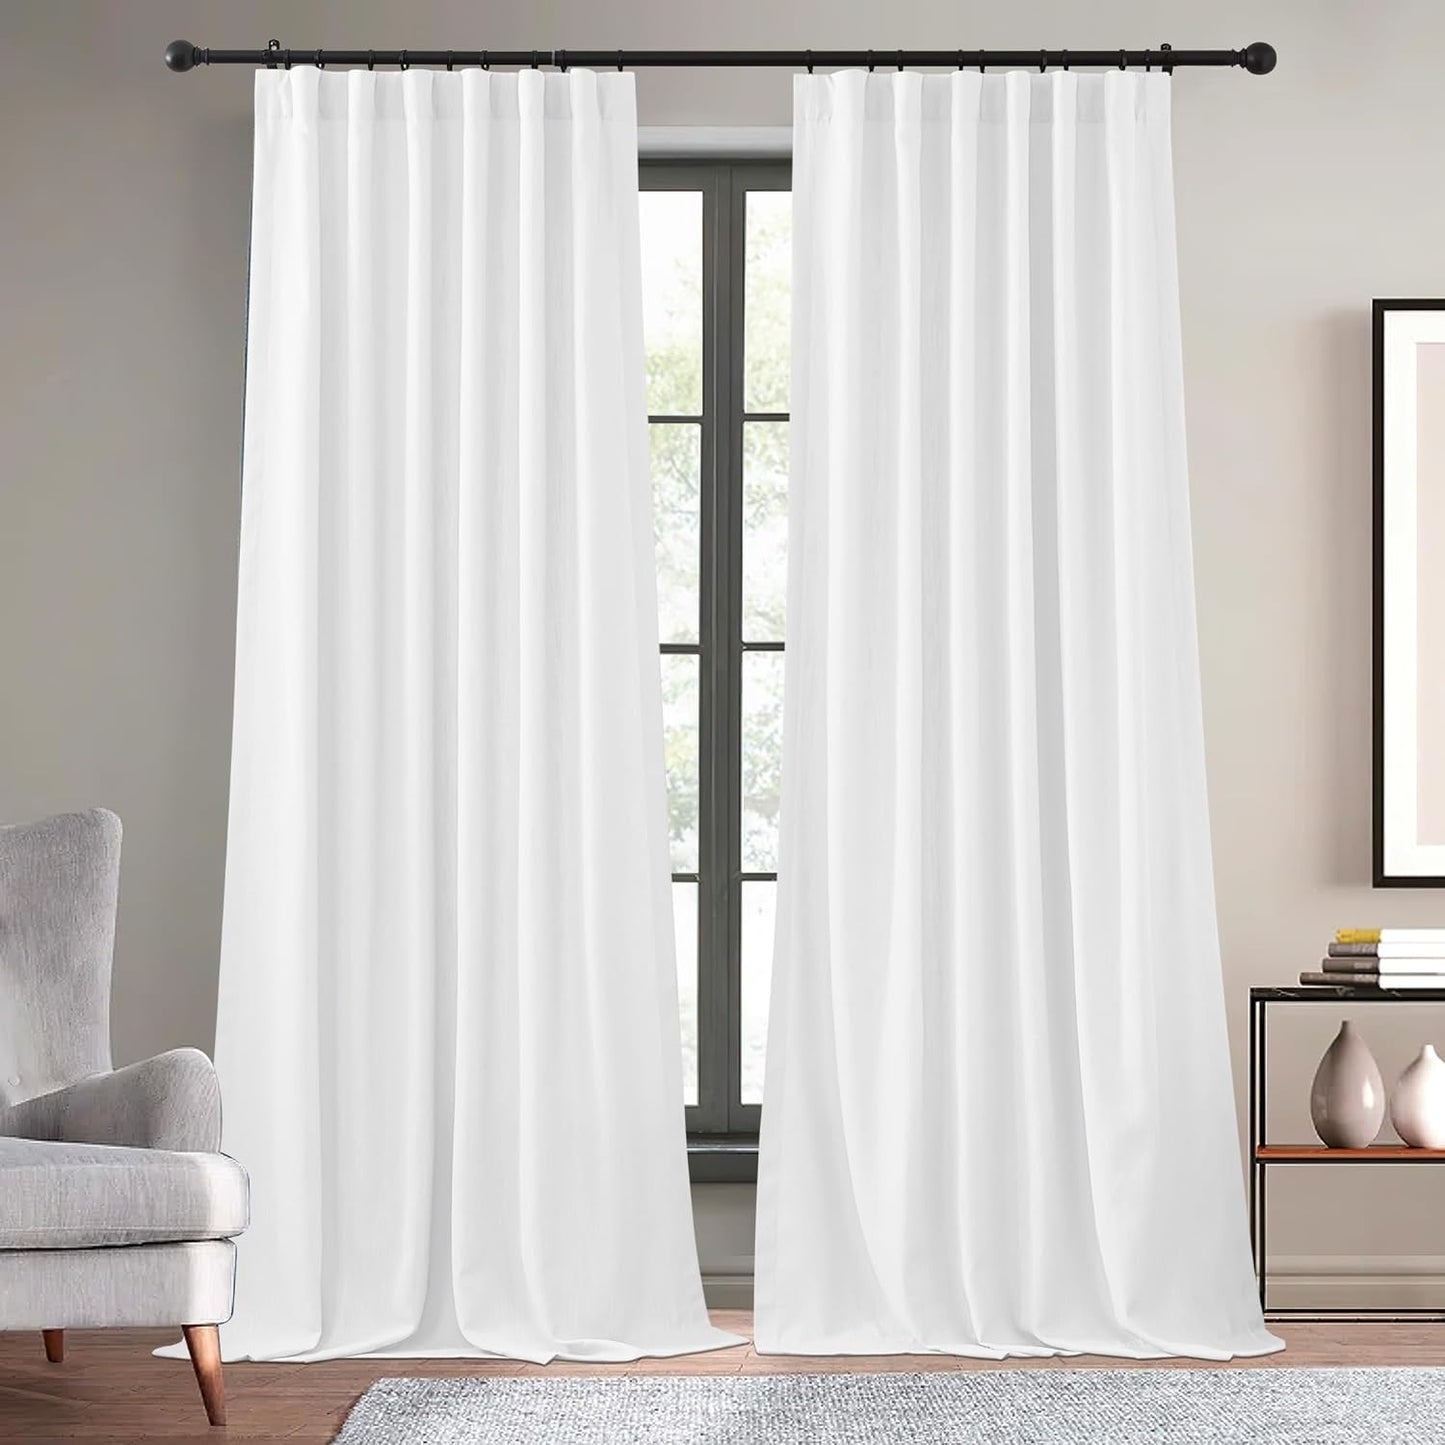 KGORGE Thick Faux Linen Weave Textured Curtains for Bedroom Light Filtering Semi Sheer Curtains Farmhouse Decor Pinch Pleated Window Drapes for Living Room, Linen, W 52" X L 96", 2 Pcs  KGORGE Pure White W 52 X L 120 | Pair 